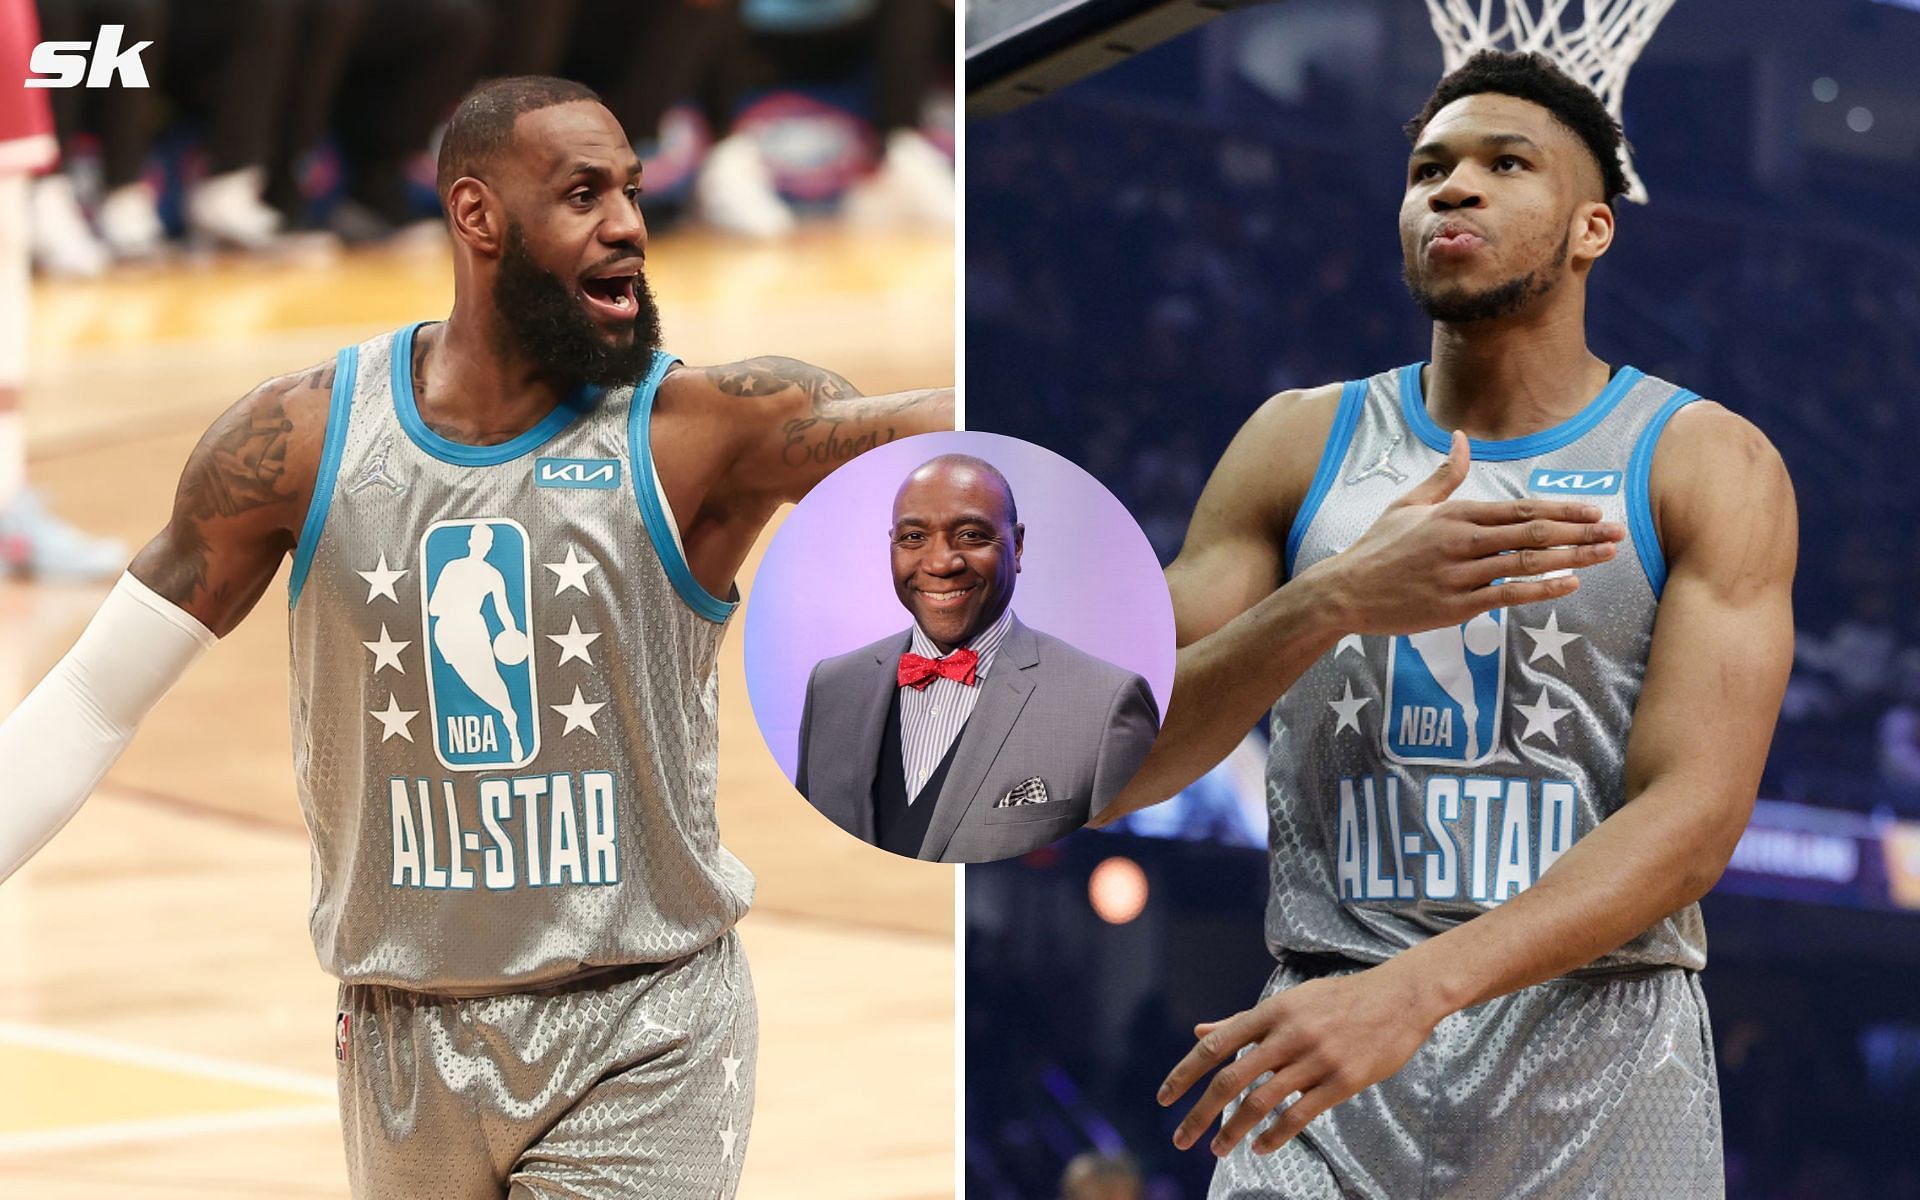 NBA All-Star Game 2023 saw one of the lowest ratings in league history